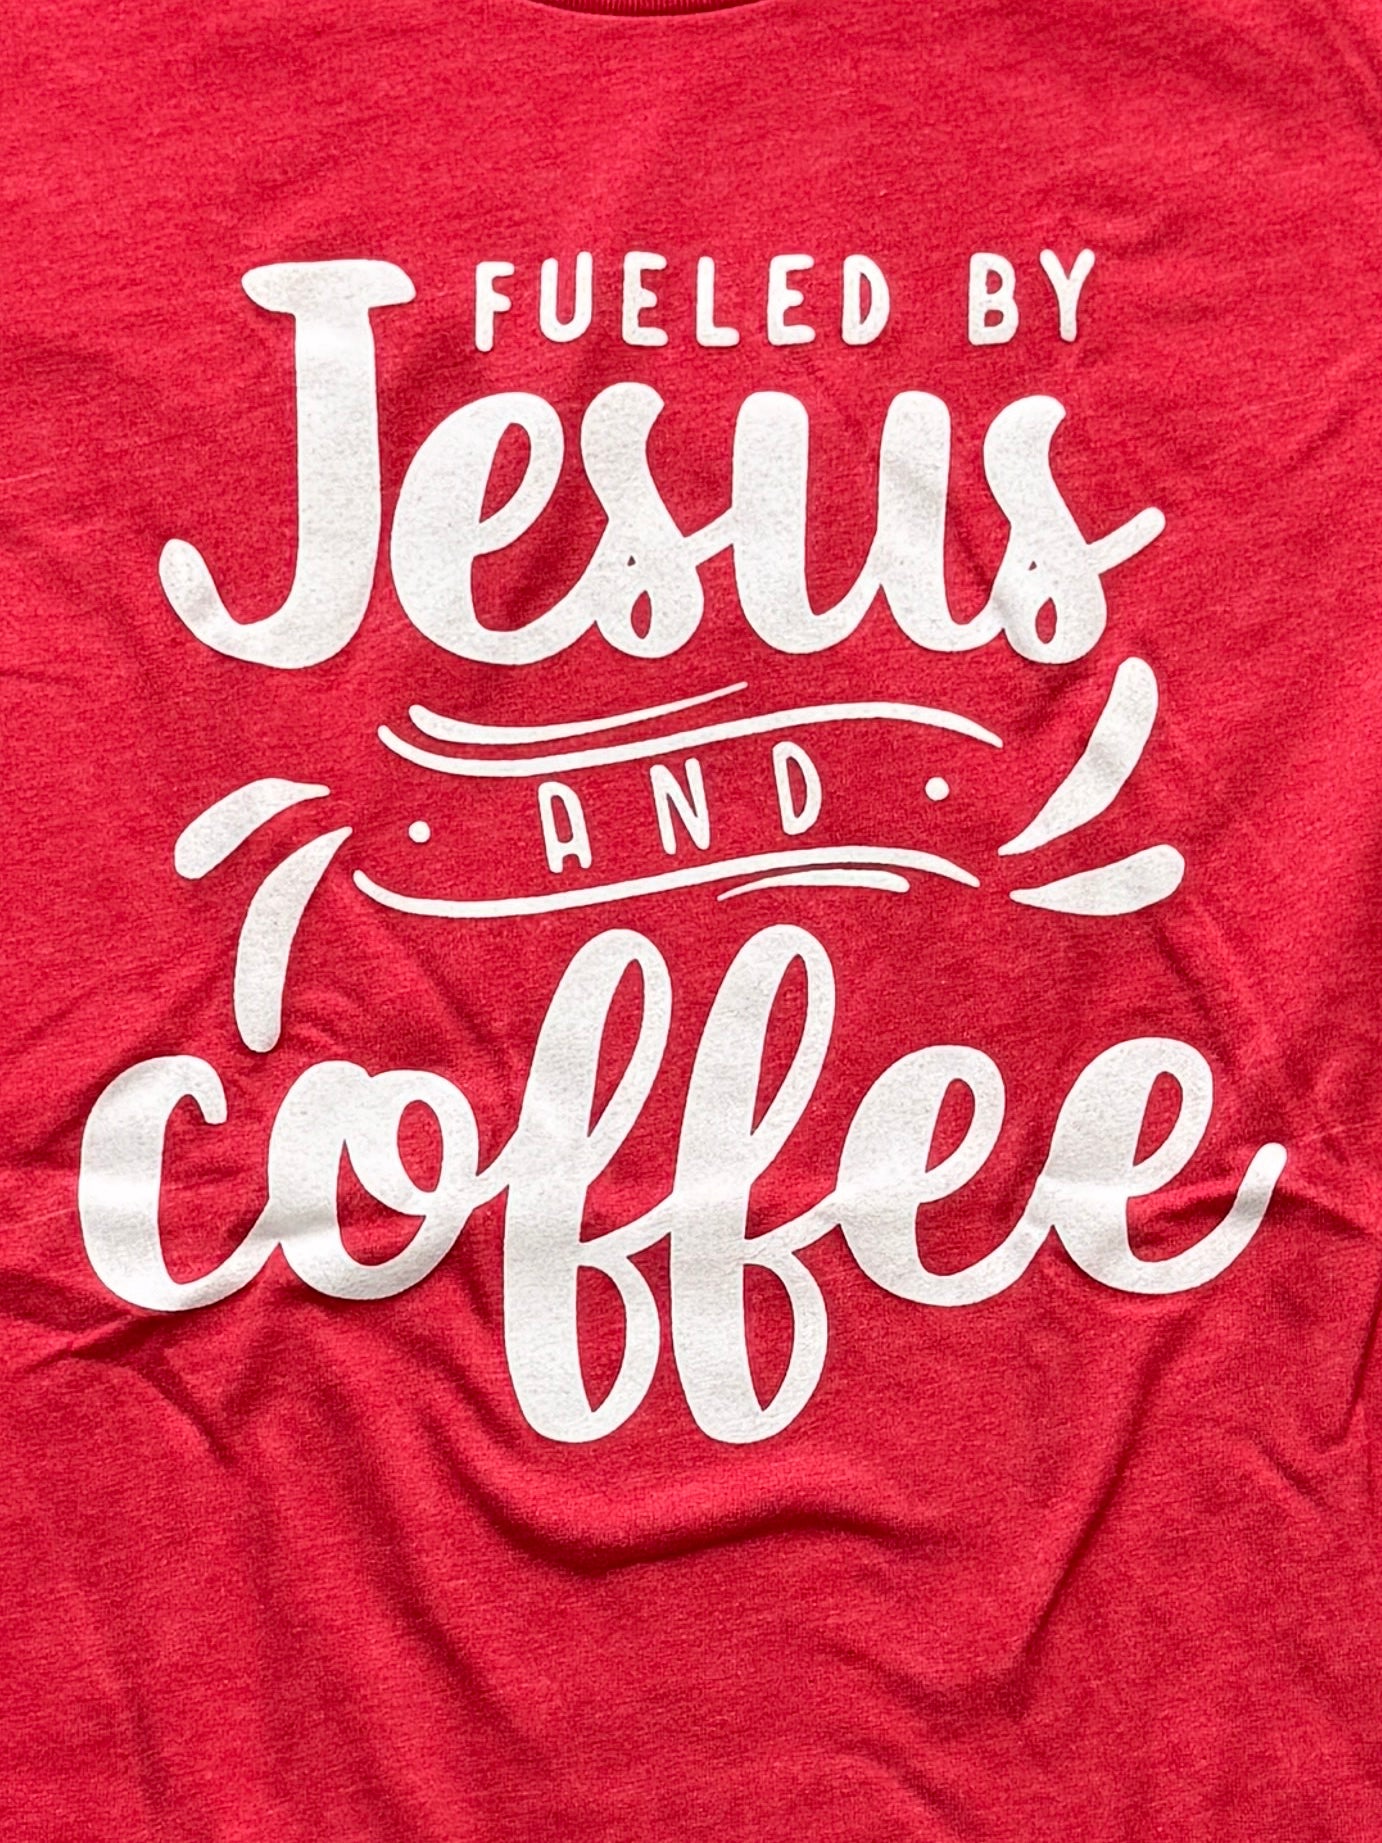 Fueled By Jesus and Coffee  Graphic Tee